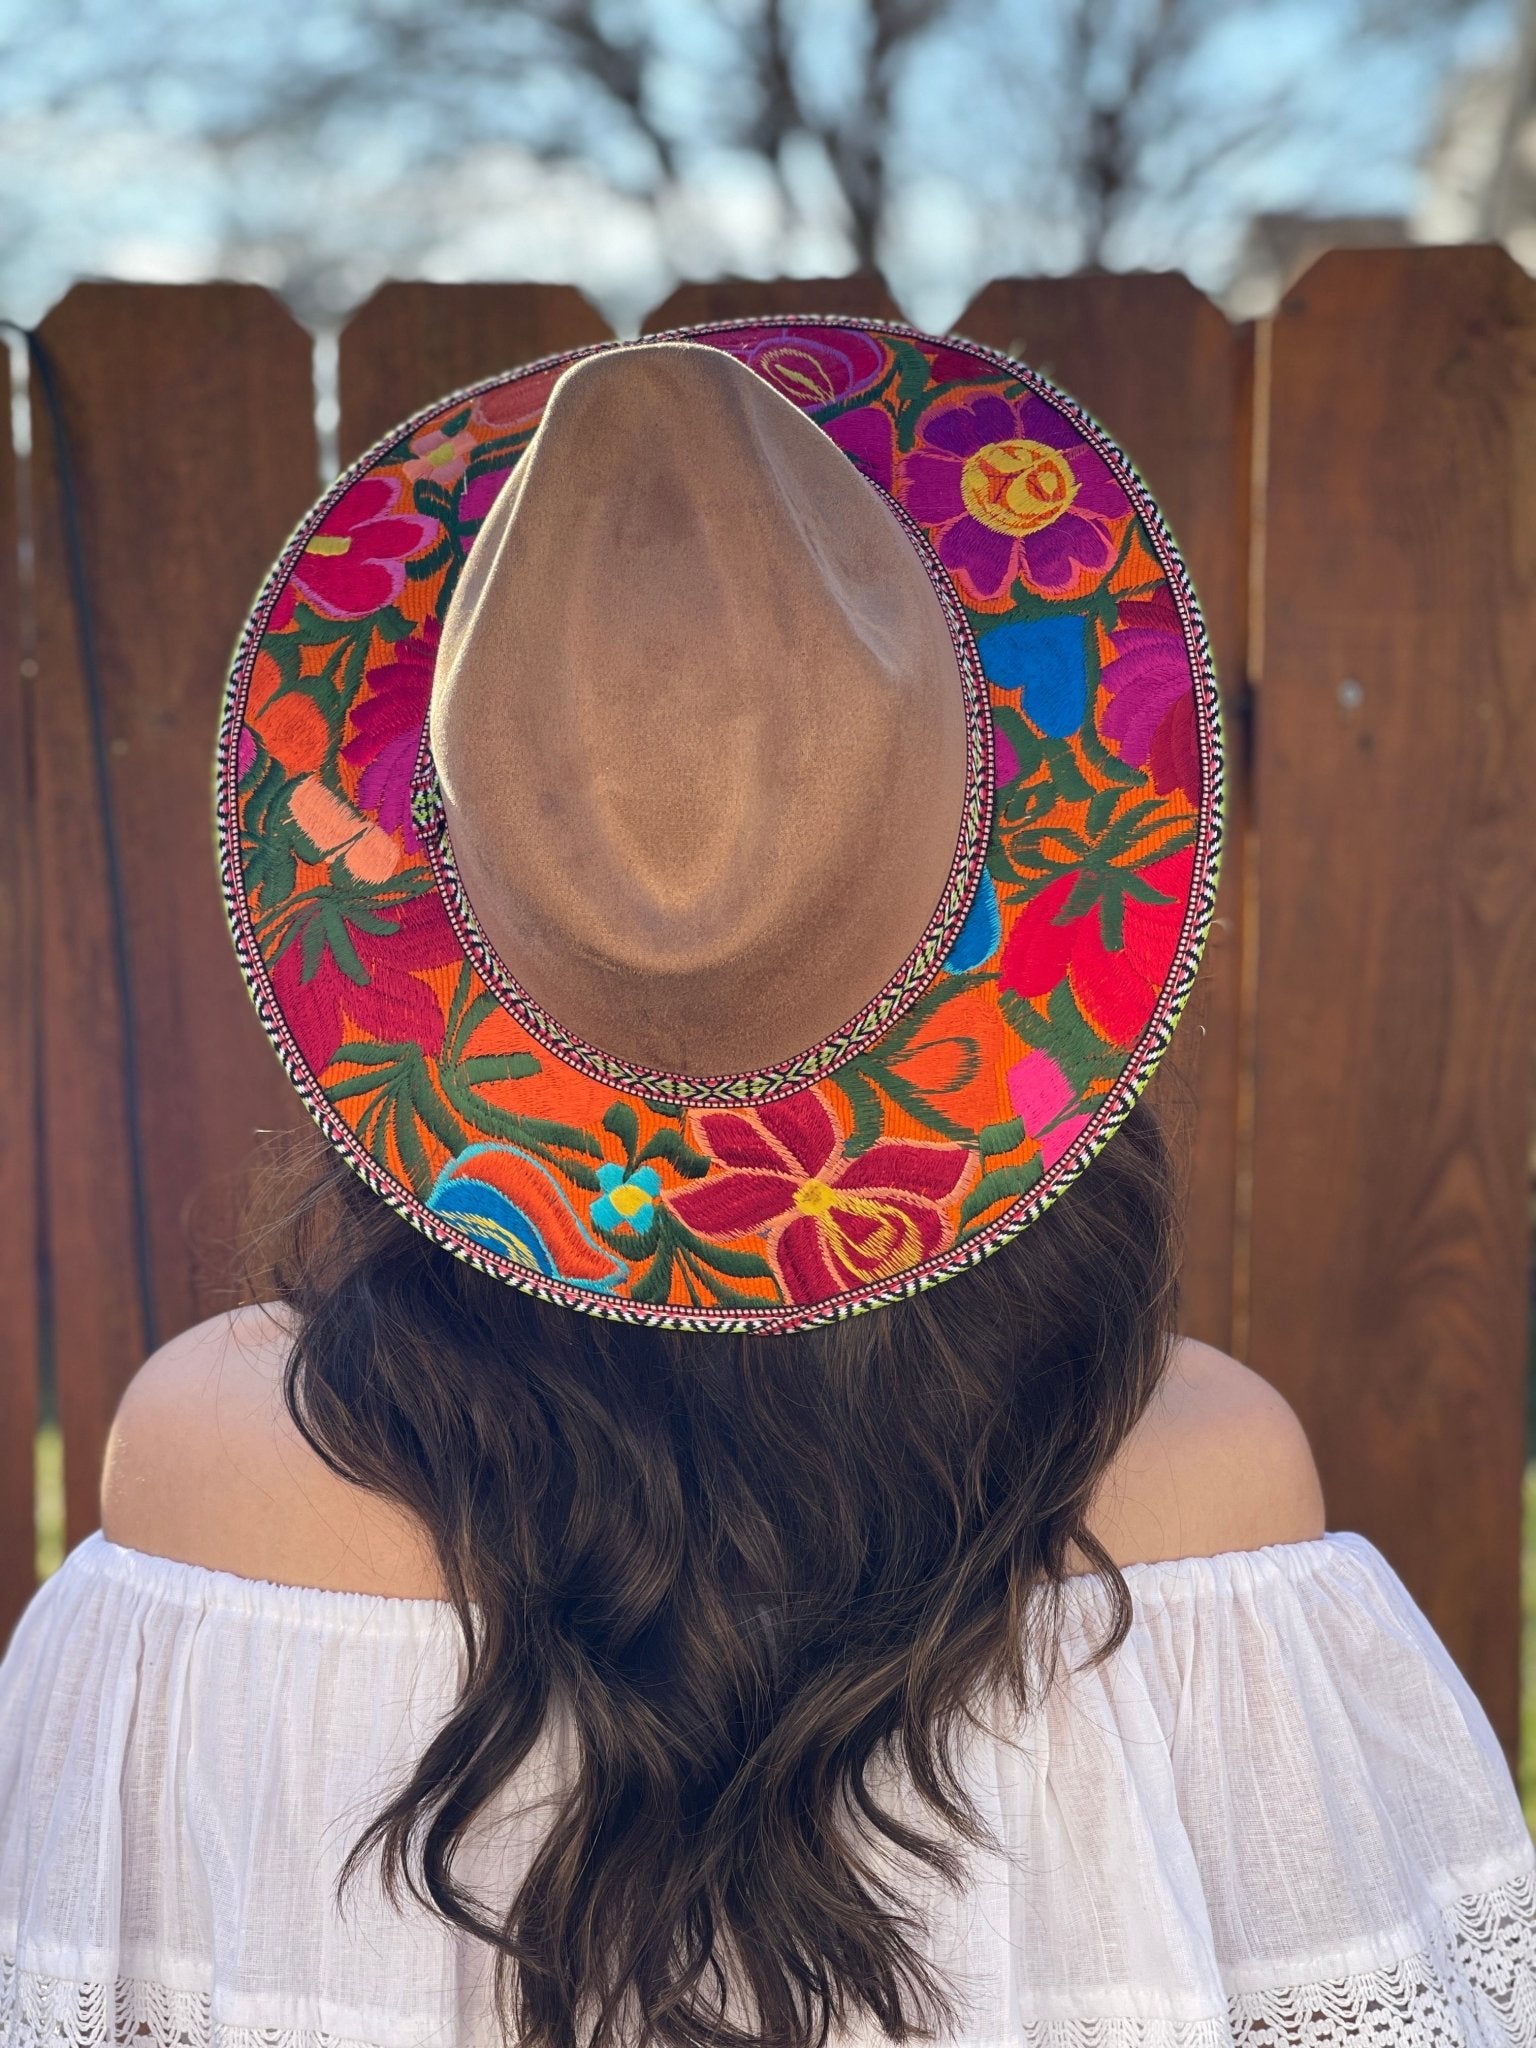 Mexican Artisanal Hat. Embroidered Mexican Hat. Colorful Suede Hat. Sombrero Gamuza Bordado - Solei Store